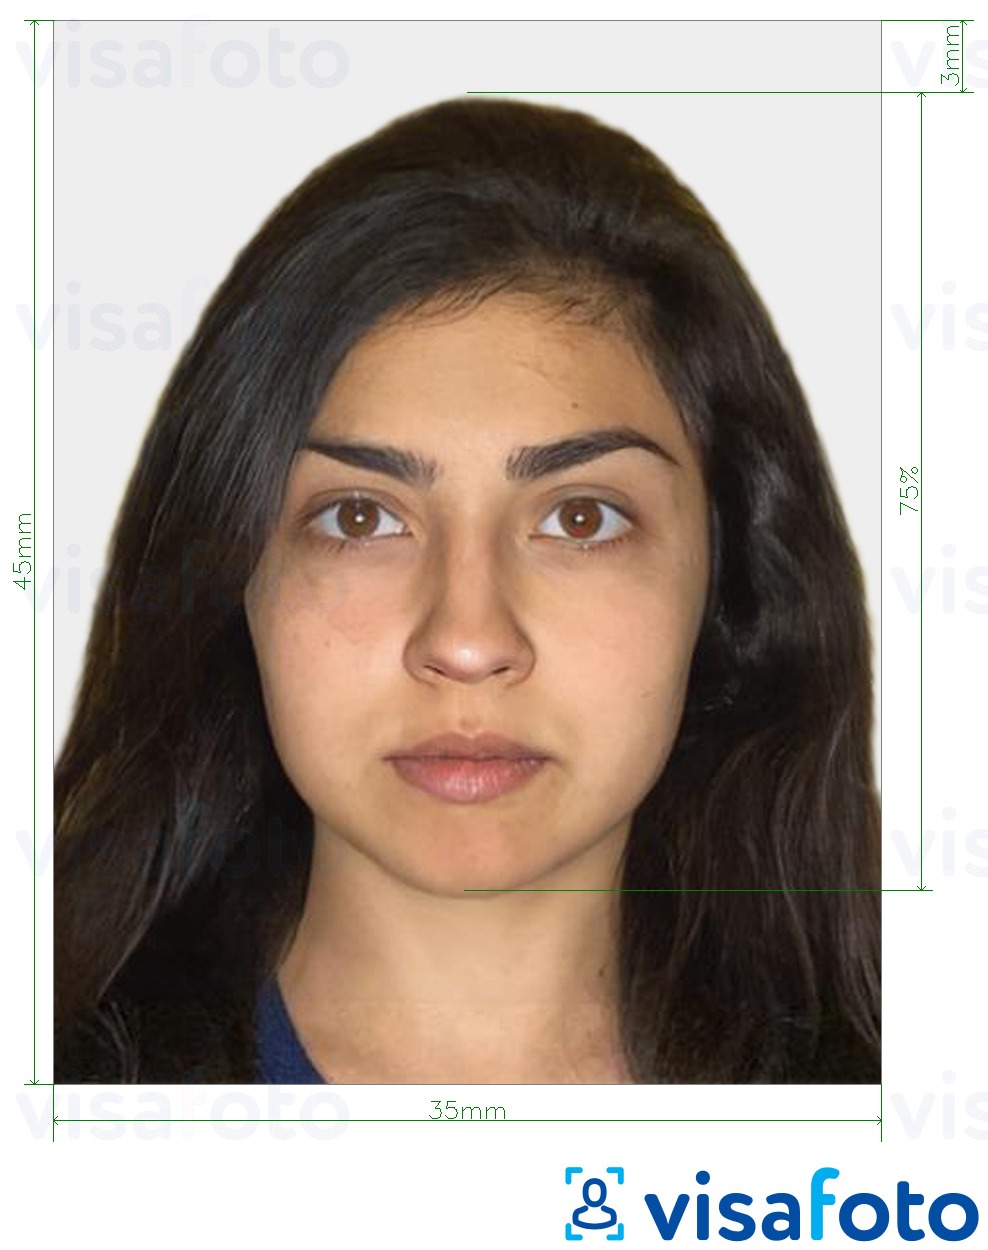 Photo for an Indian passport